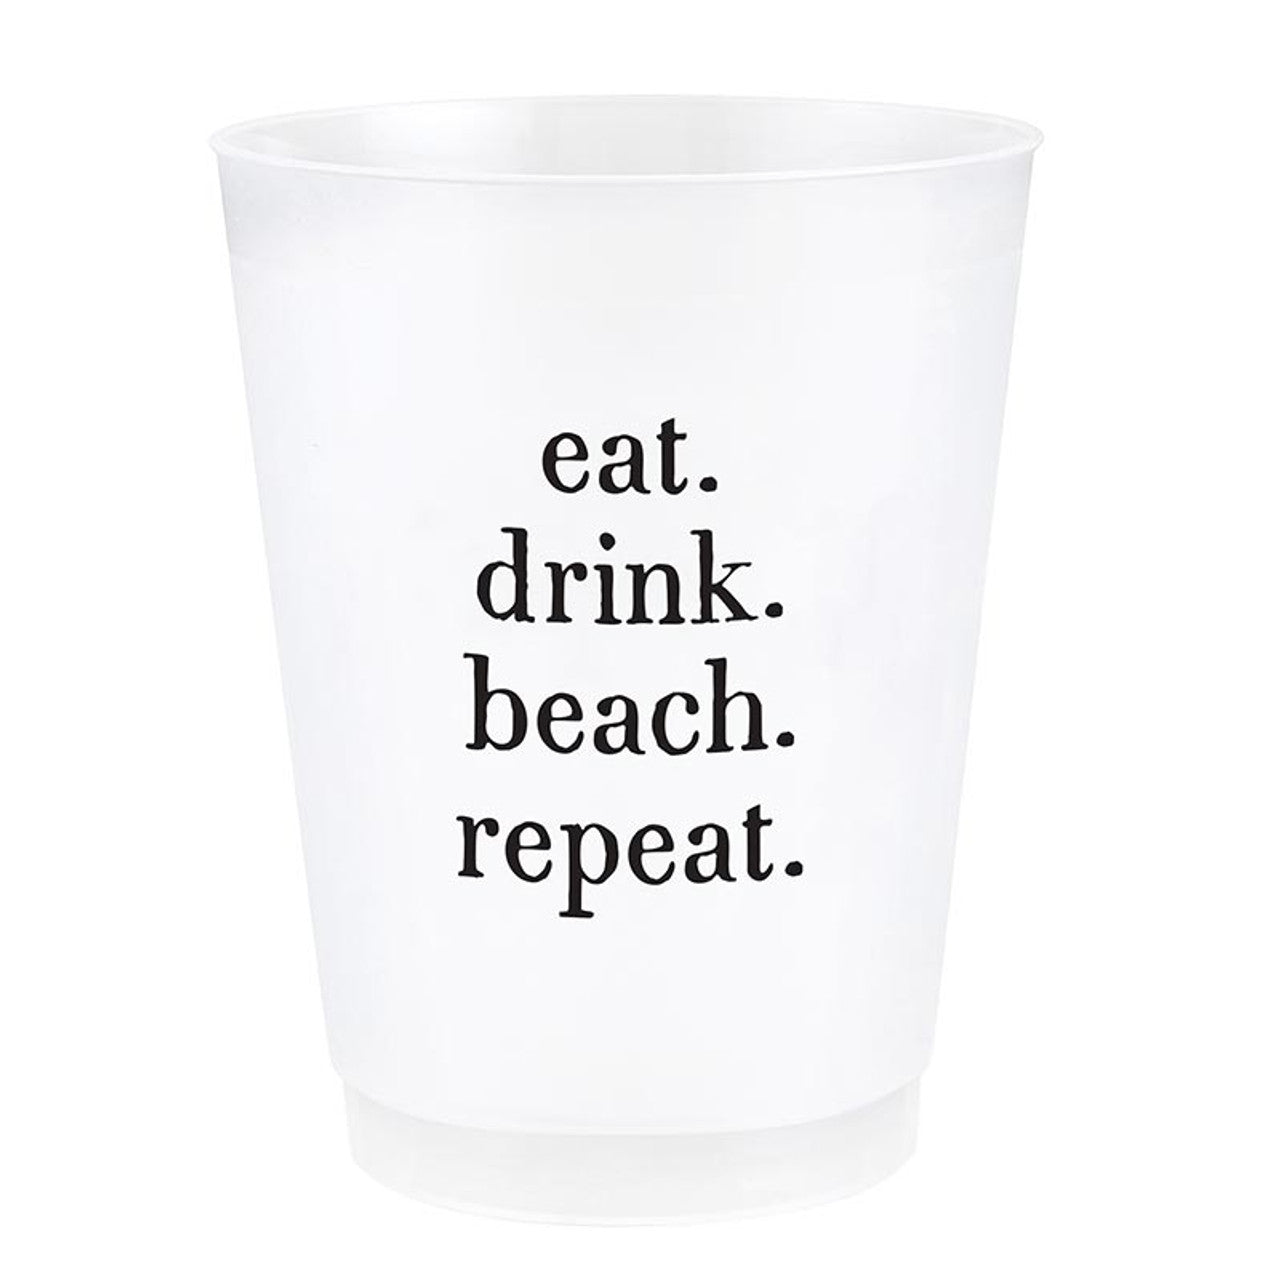 "Eat. Drink. Beach. Repeat" Set of 8 Party Cups